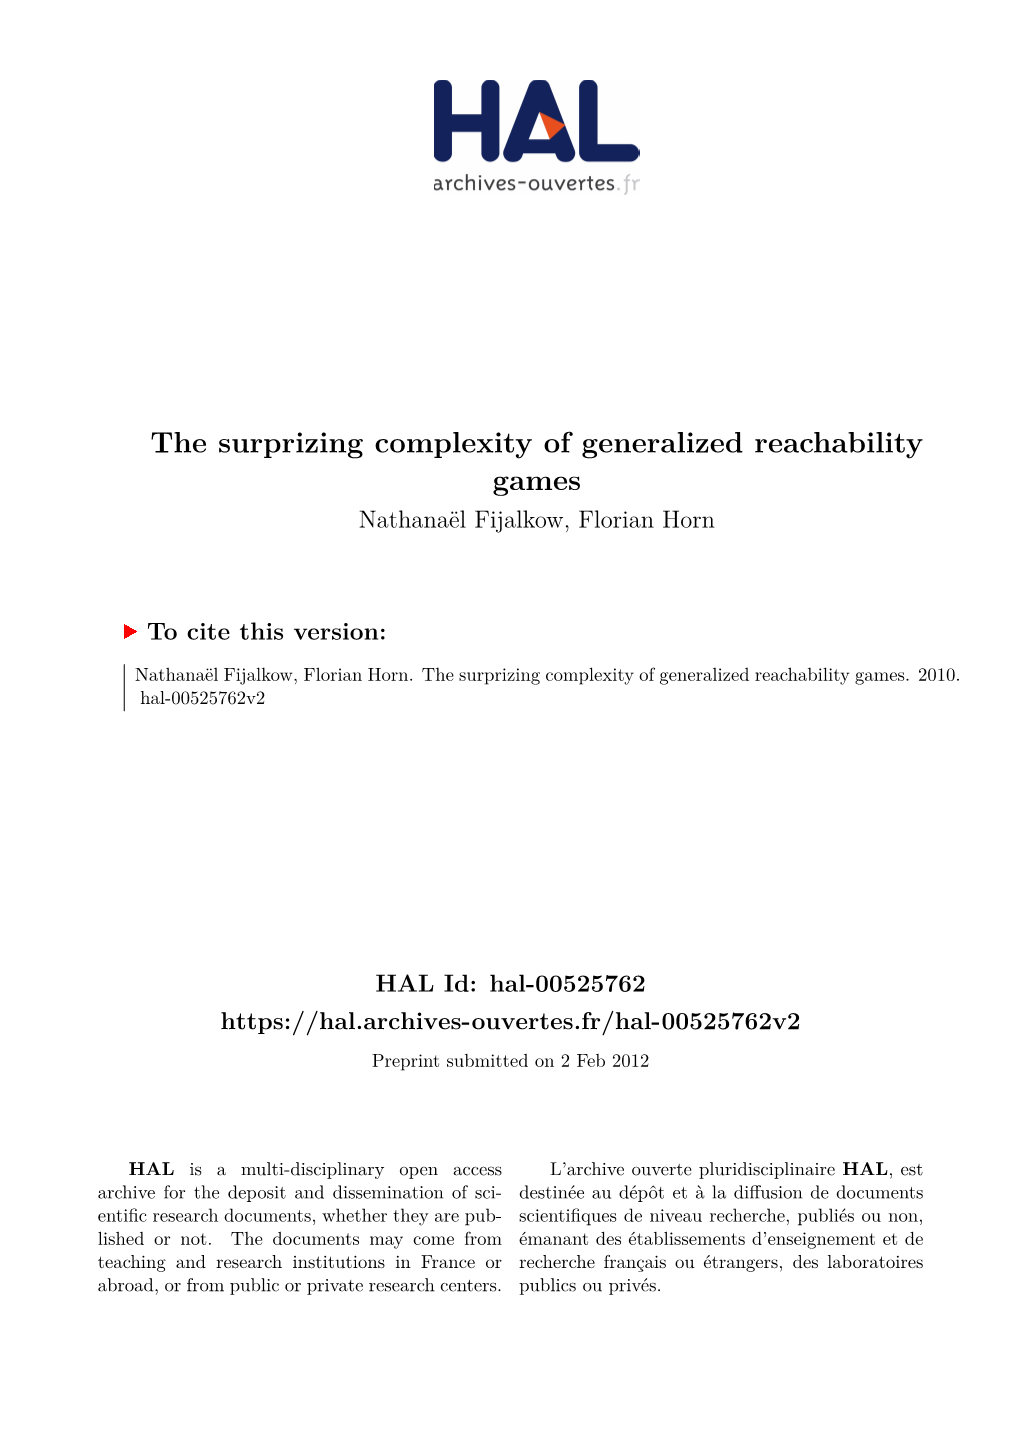 The Surprizing Complexity of Generalized Reachability Games Nathanaël Fijalkow, Florian Horn